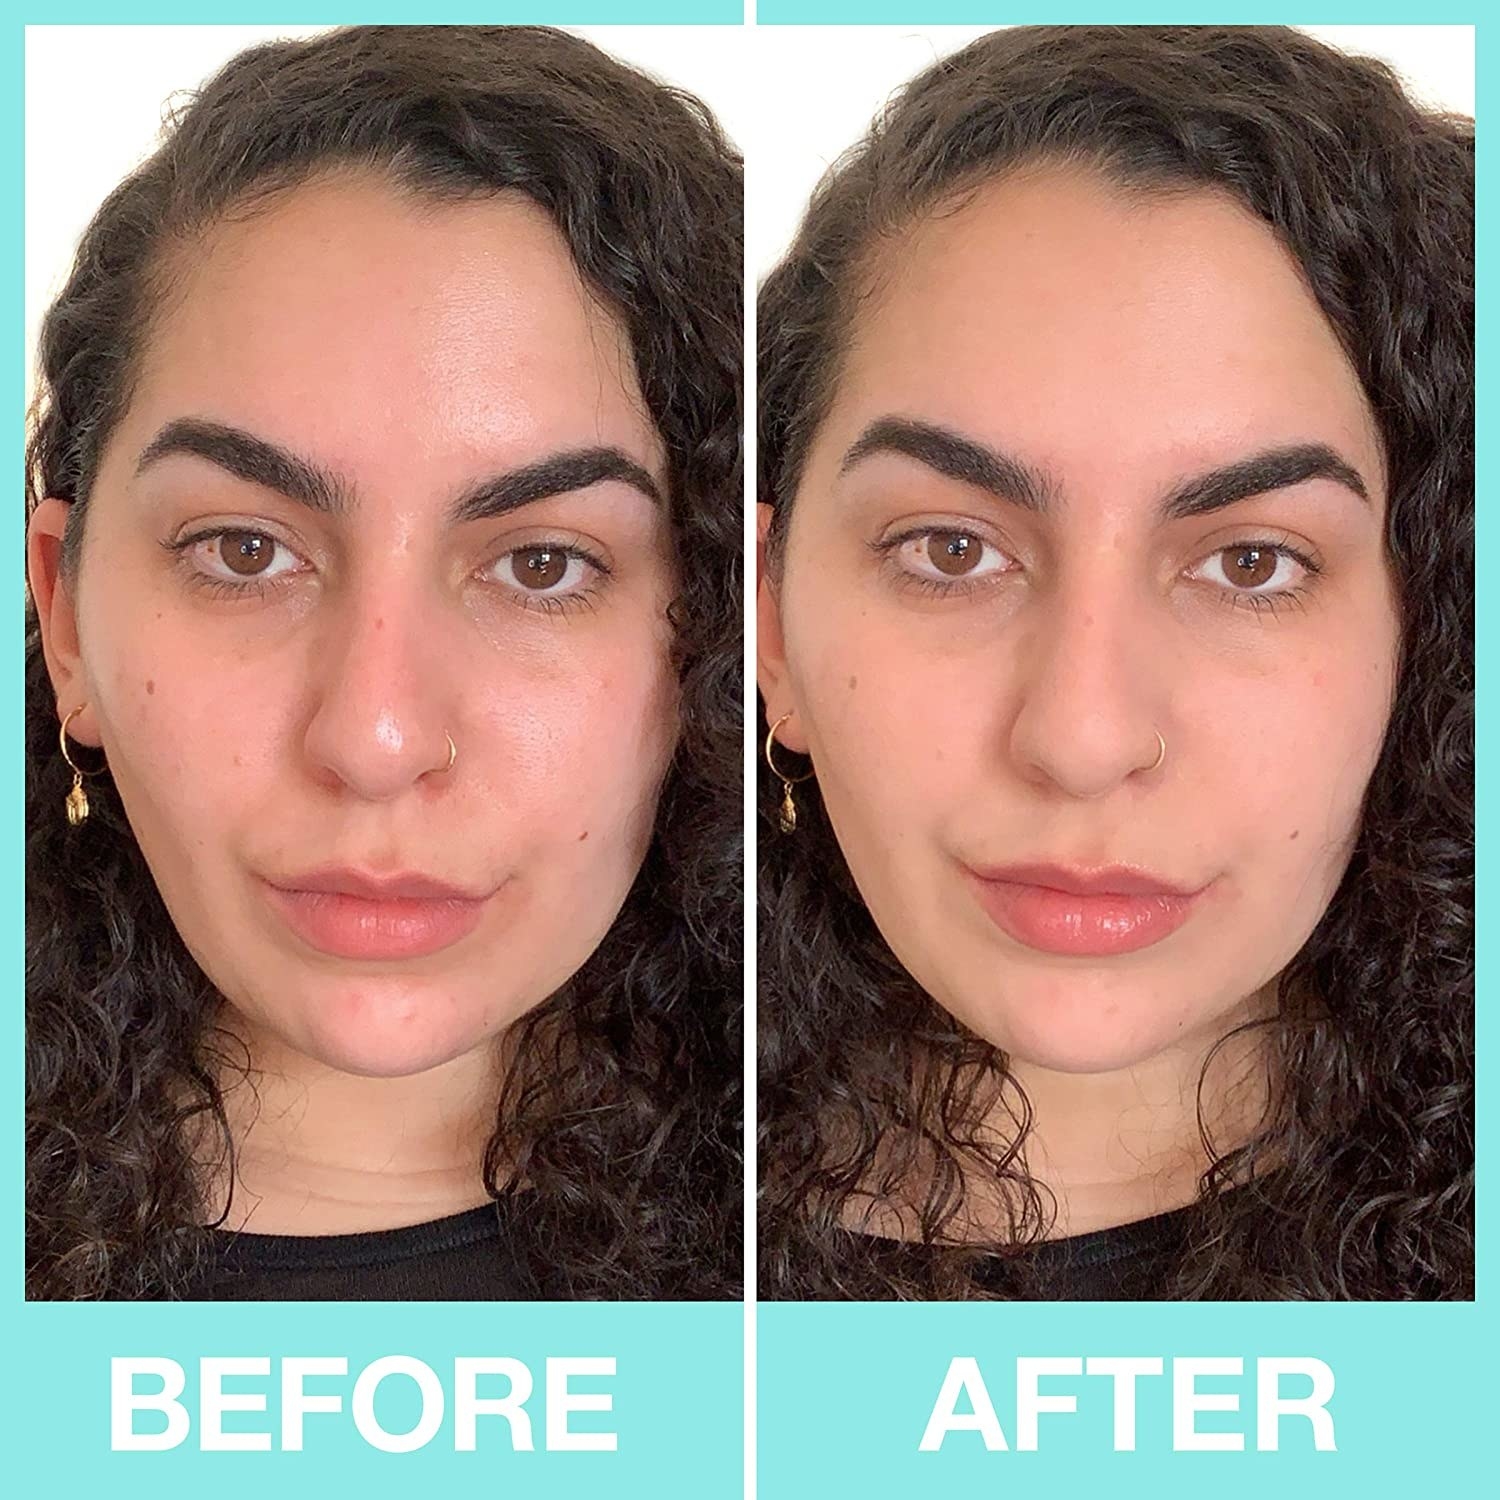 before and after photo of model with red skin on left and visibly more even skin on right